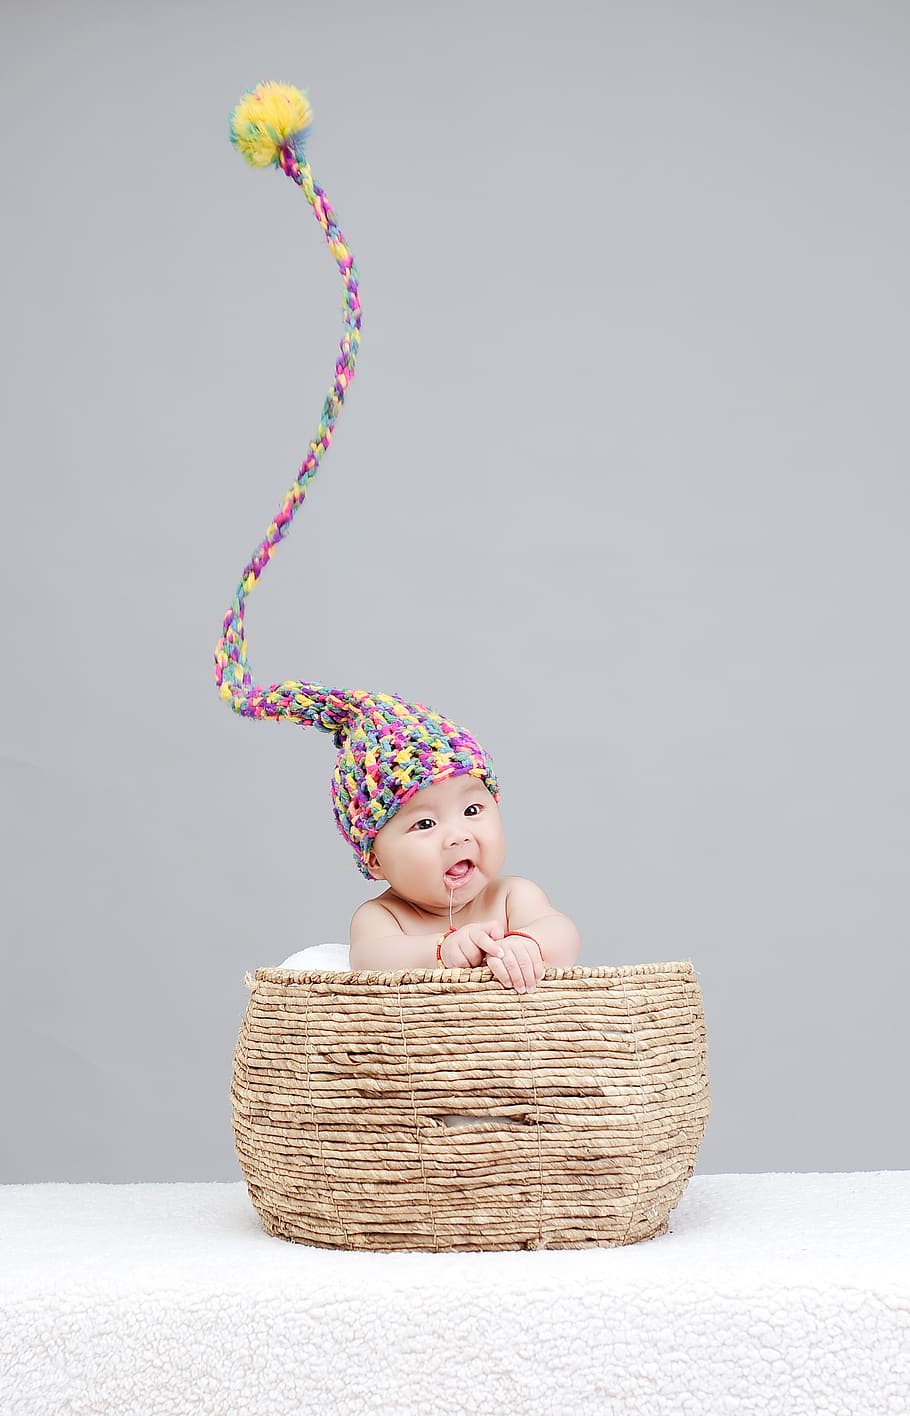 cute, baby, kids, naive, the little girl, studio shot, indoors, container, one person, basket